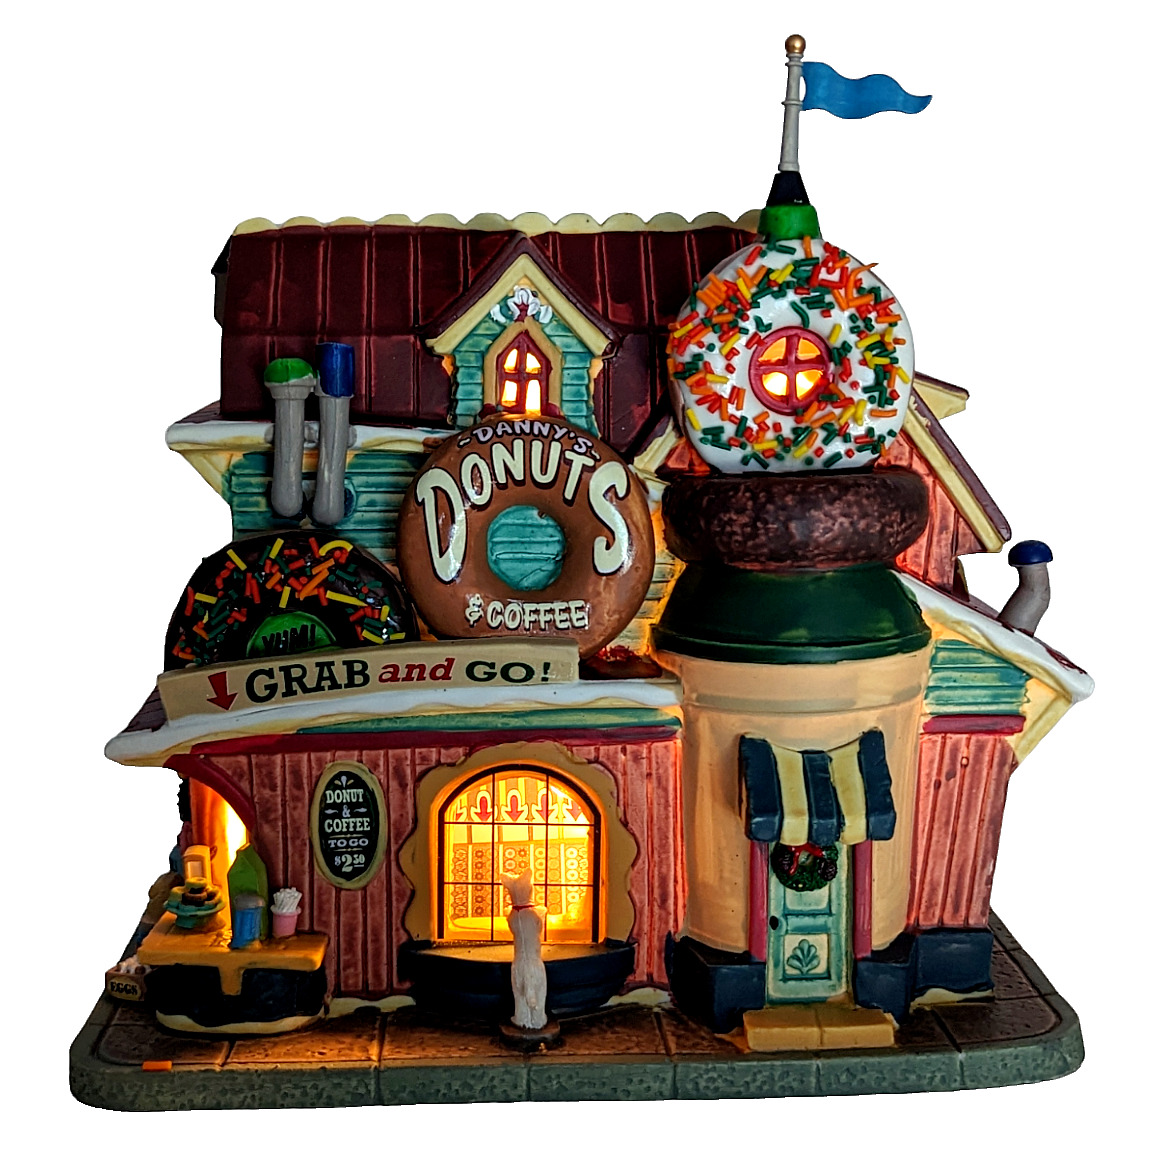 Lemax Harvest Crossing Danny's Donuts Coffee Lighted Buildings Holiday Decor NEW